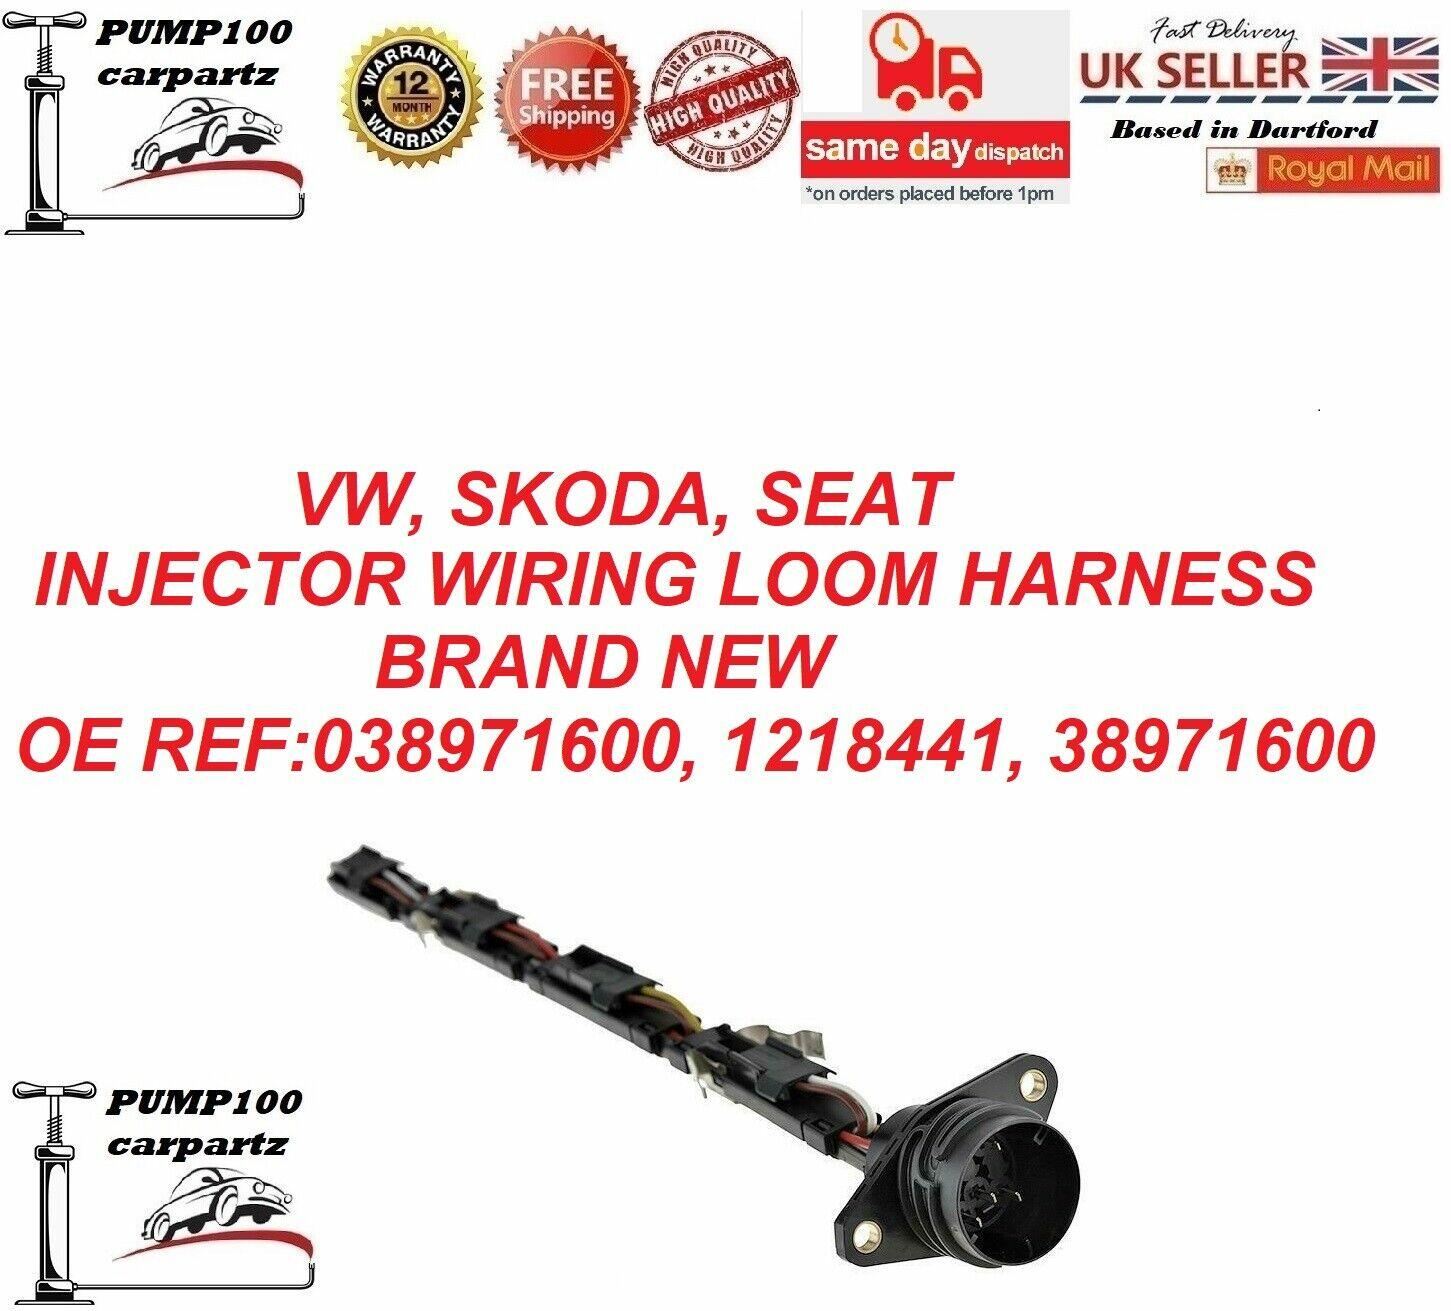 FOR VW SKODA SEAT INJECTOR WIRING LOOM HARNESS FOR DIESEL ENGINES 038971600